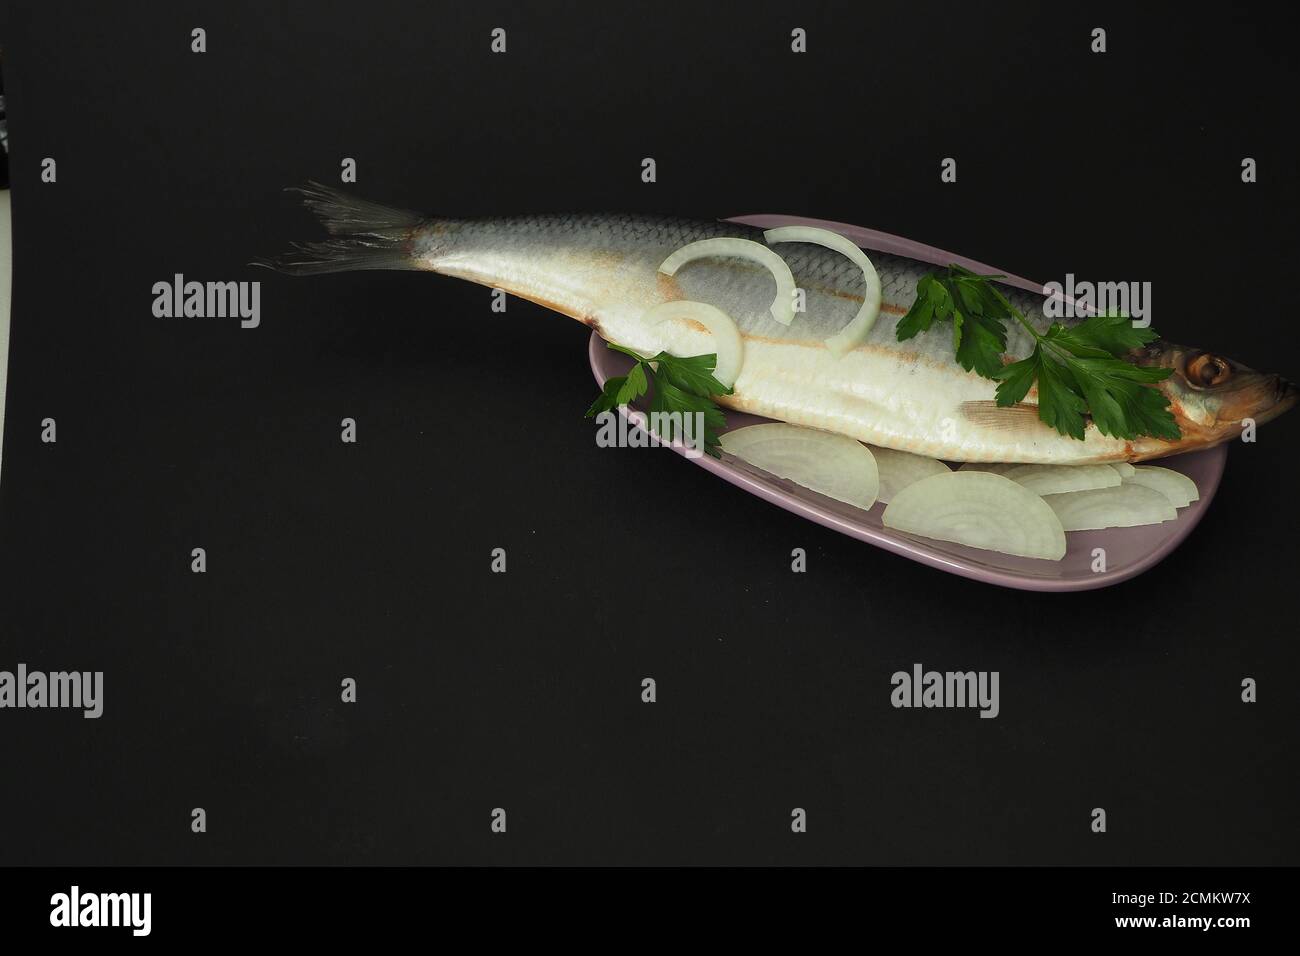 Herring is whole, undivided with onion and parsley close-up. Stock Photo